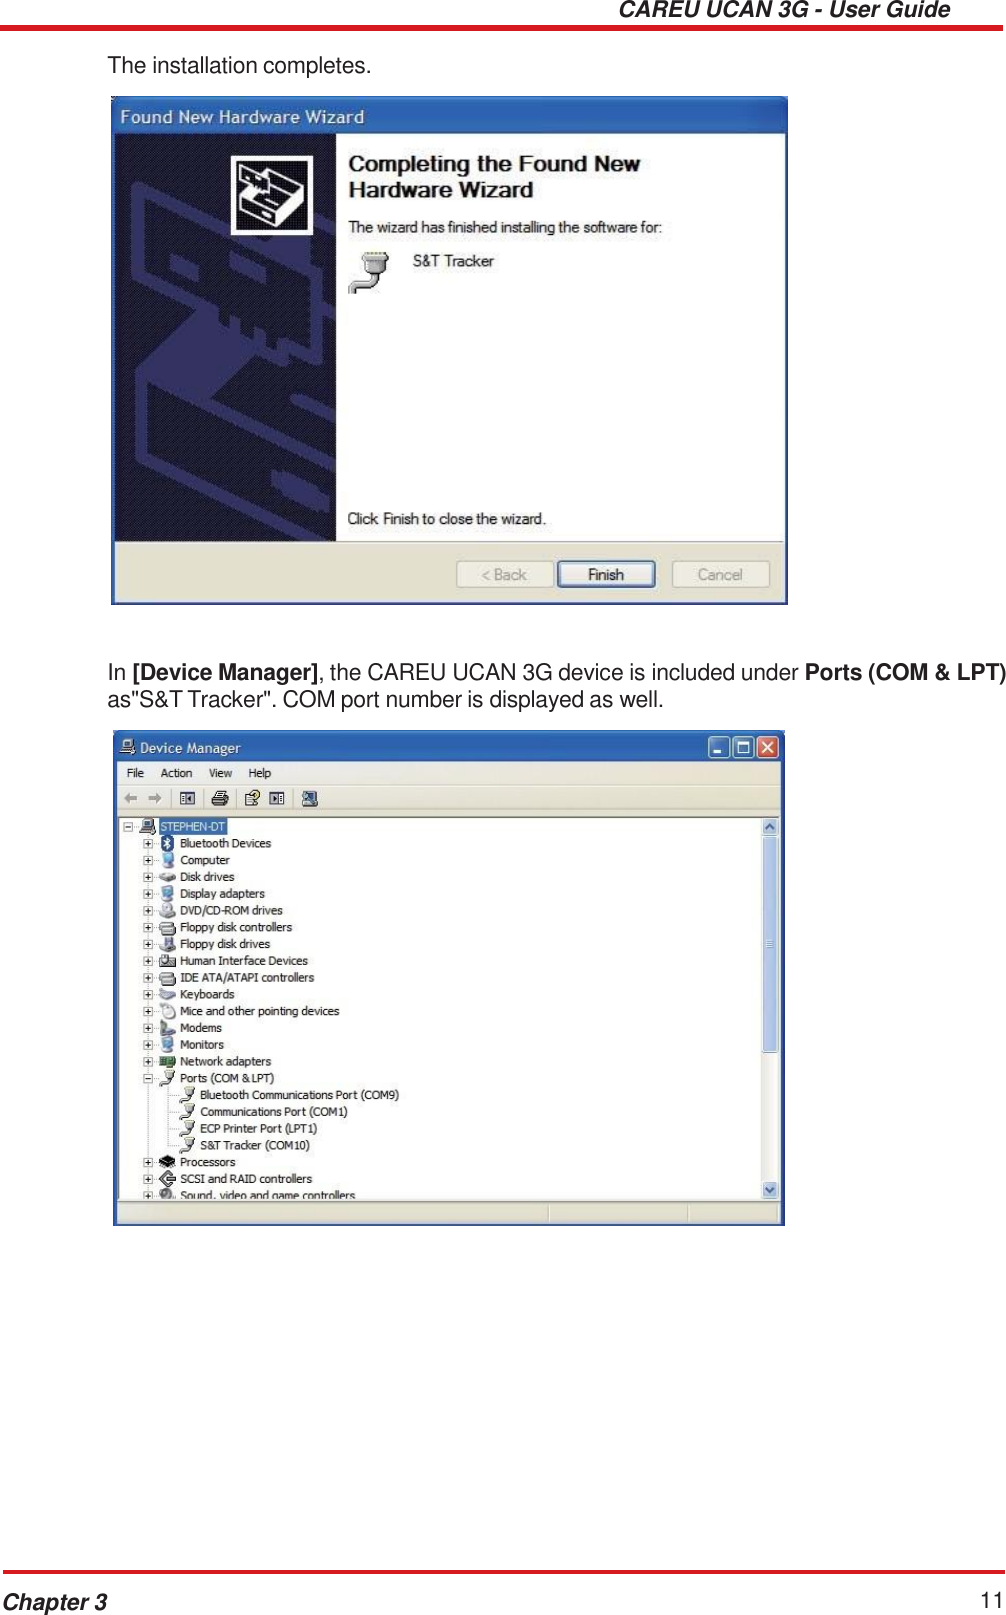 CAREU UCAN 3G - User Guide Chapter 3 11    The installation completes.      In [Device Manager], the CAREU UCAN 3G device is included under Ports (COM &amp; LPT) as&quot;S&amp;T Tracker&quot;. COM port number is displayed as well.   